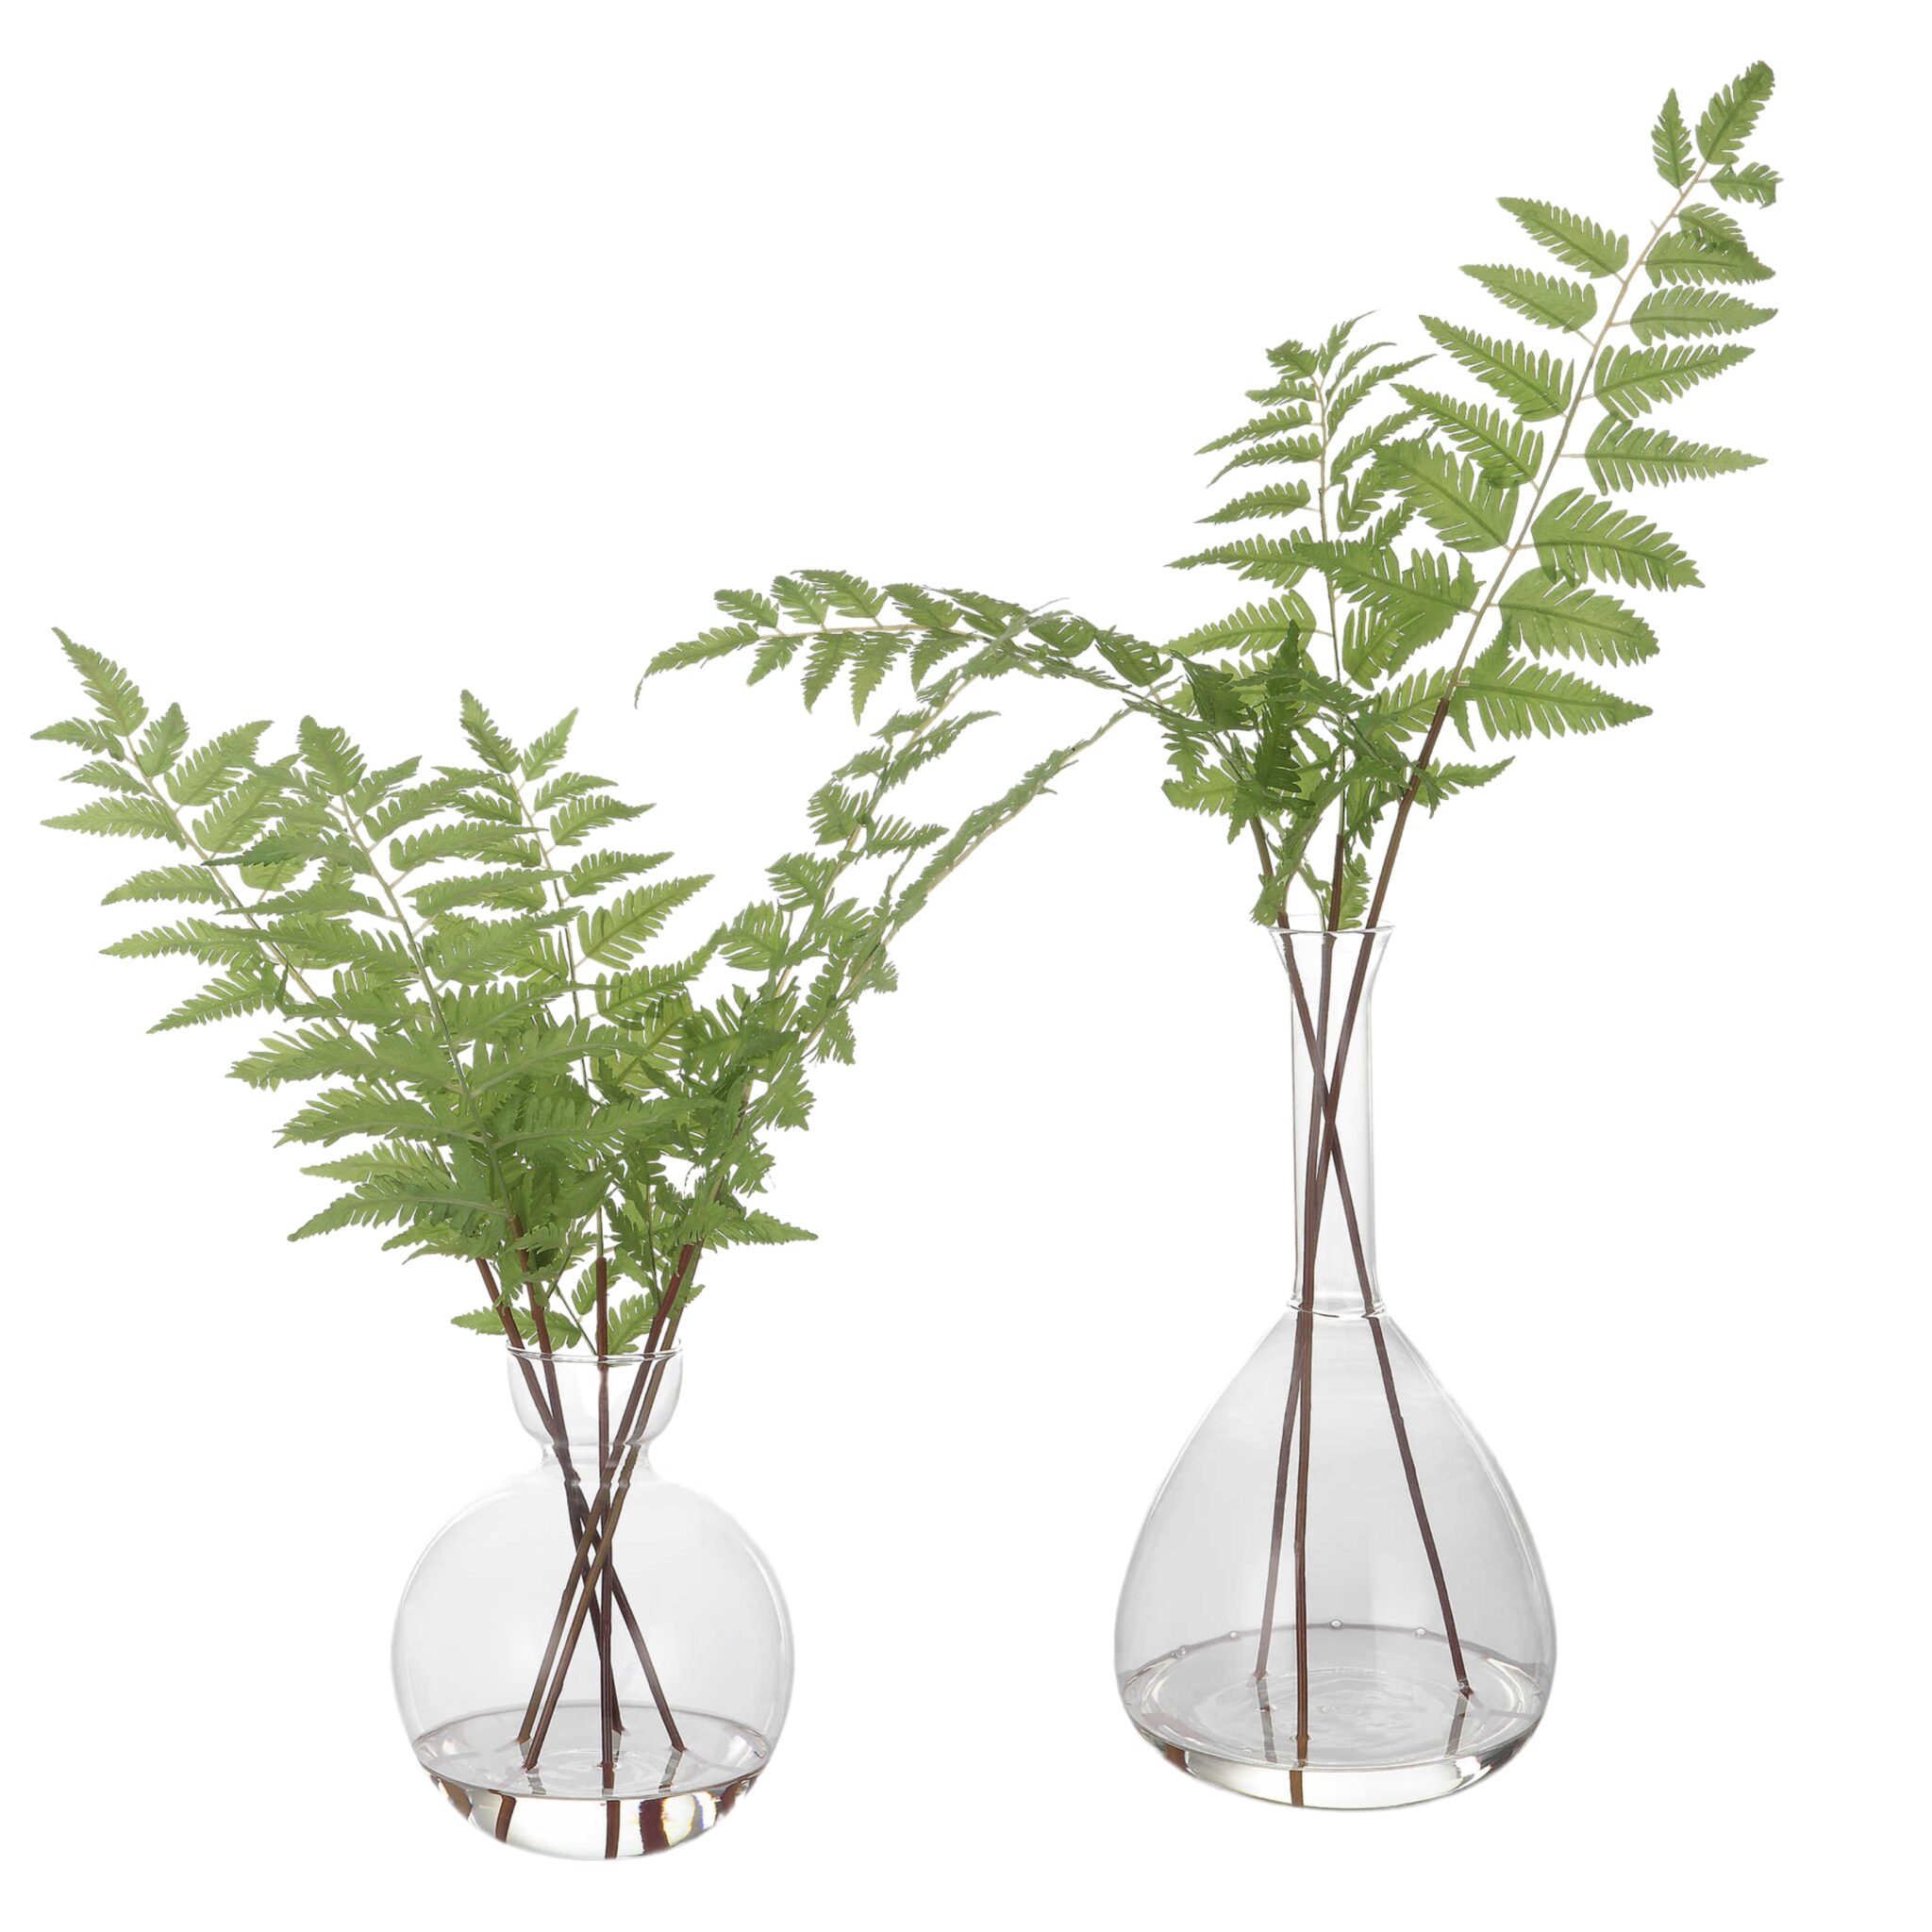 Country Ferns (Set of 2)